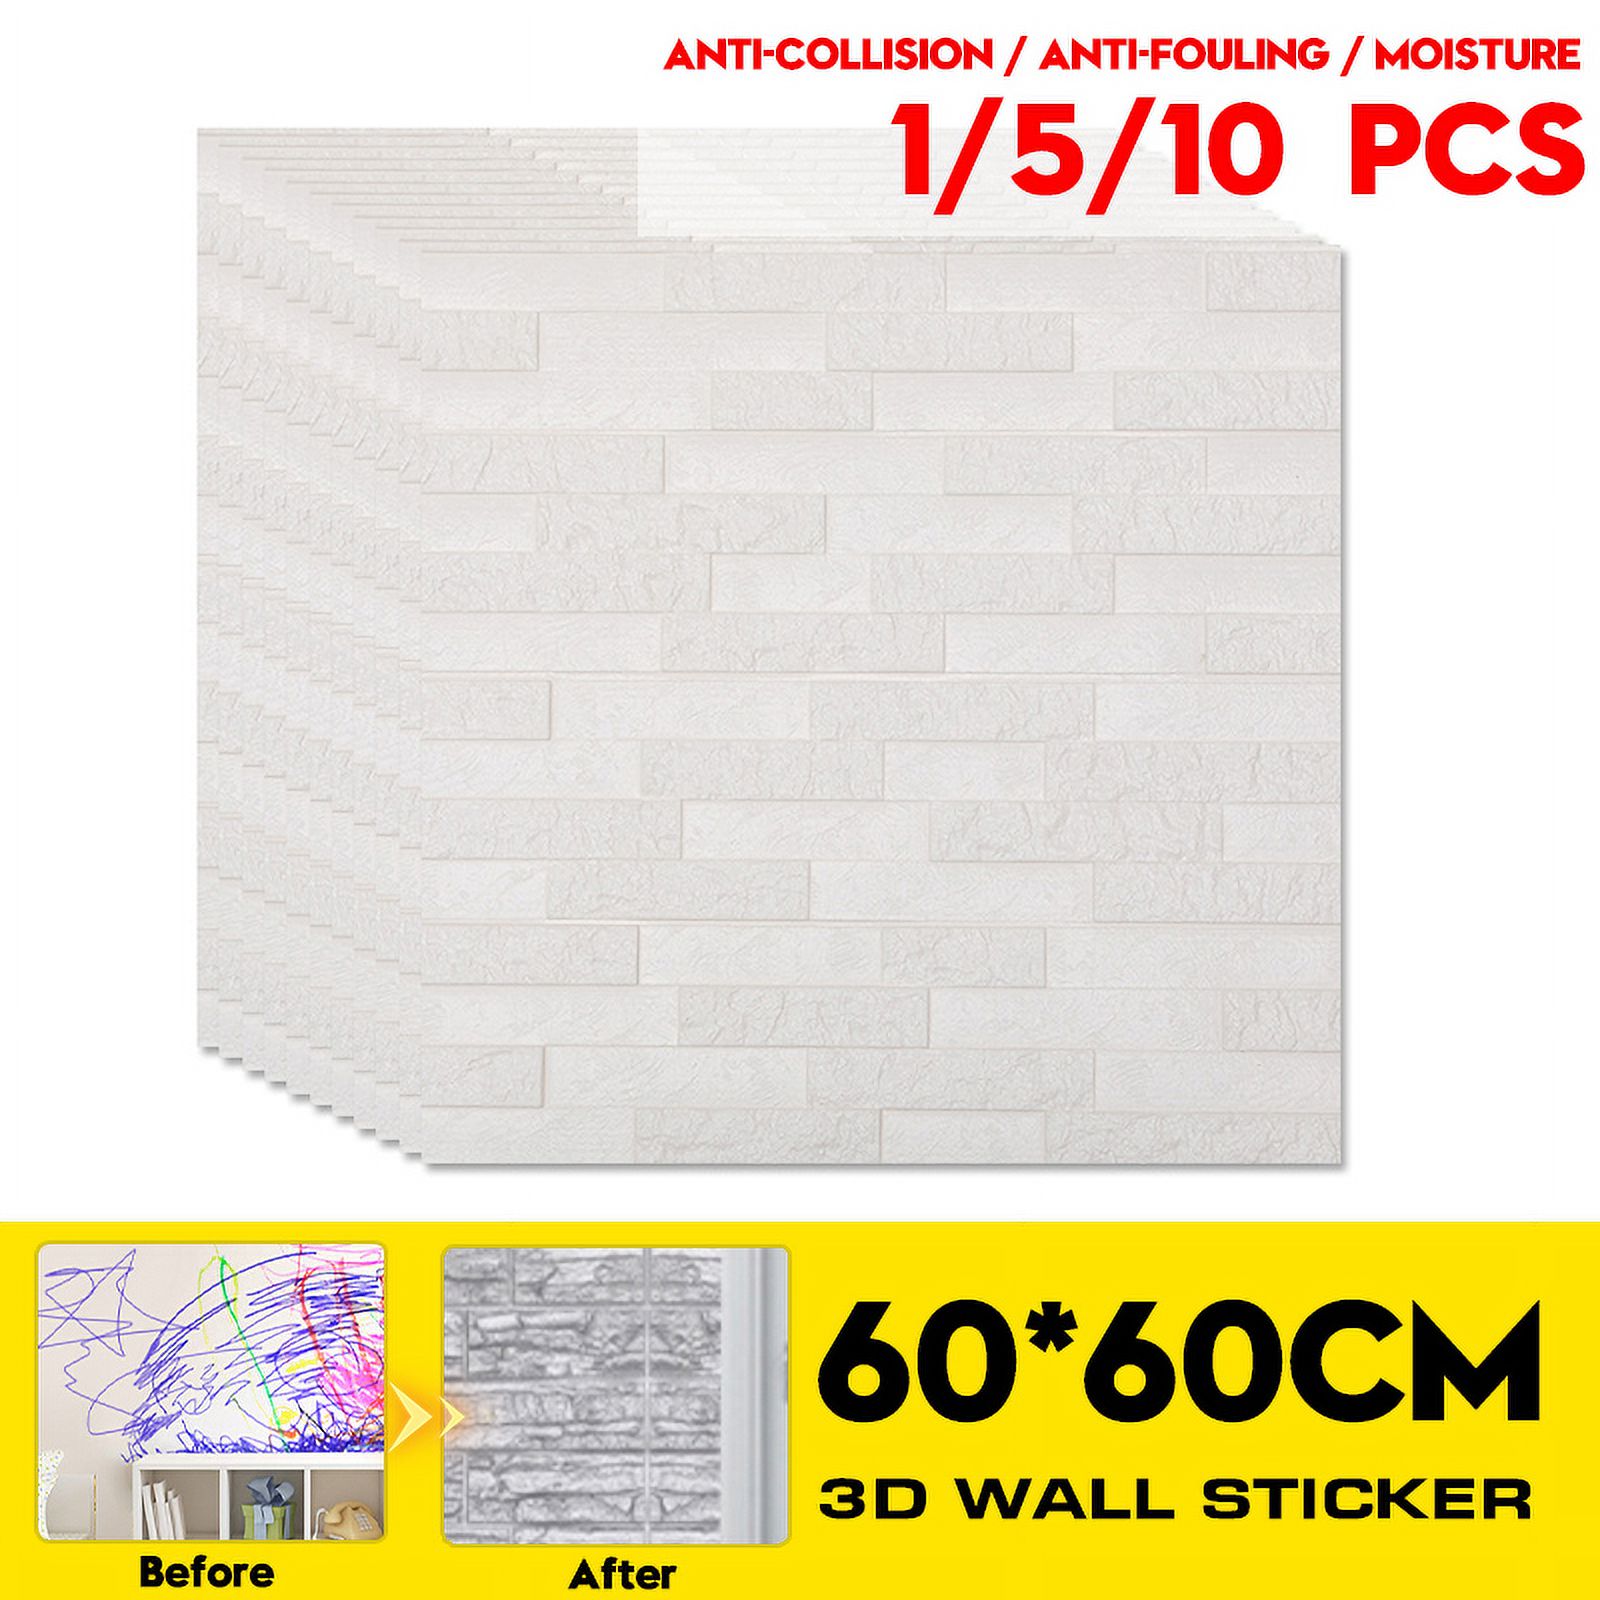 1/5/10 Pieces PE Foam Self Adhesive 3D Wall Stickers Wallpaper Embossed Brick Ceramic Tile Stone Wall Panels Decals - image 1 of 5